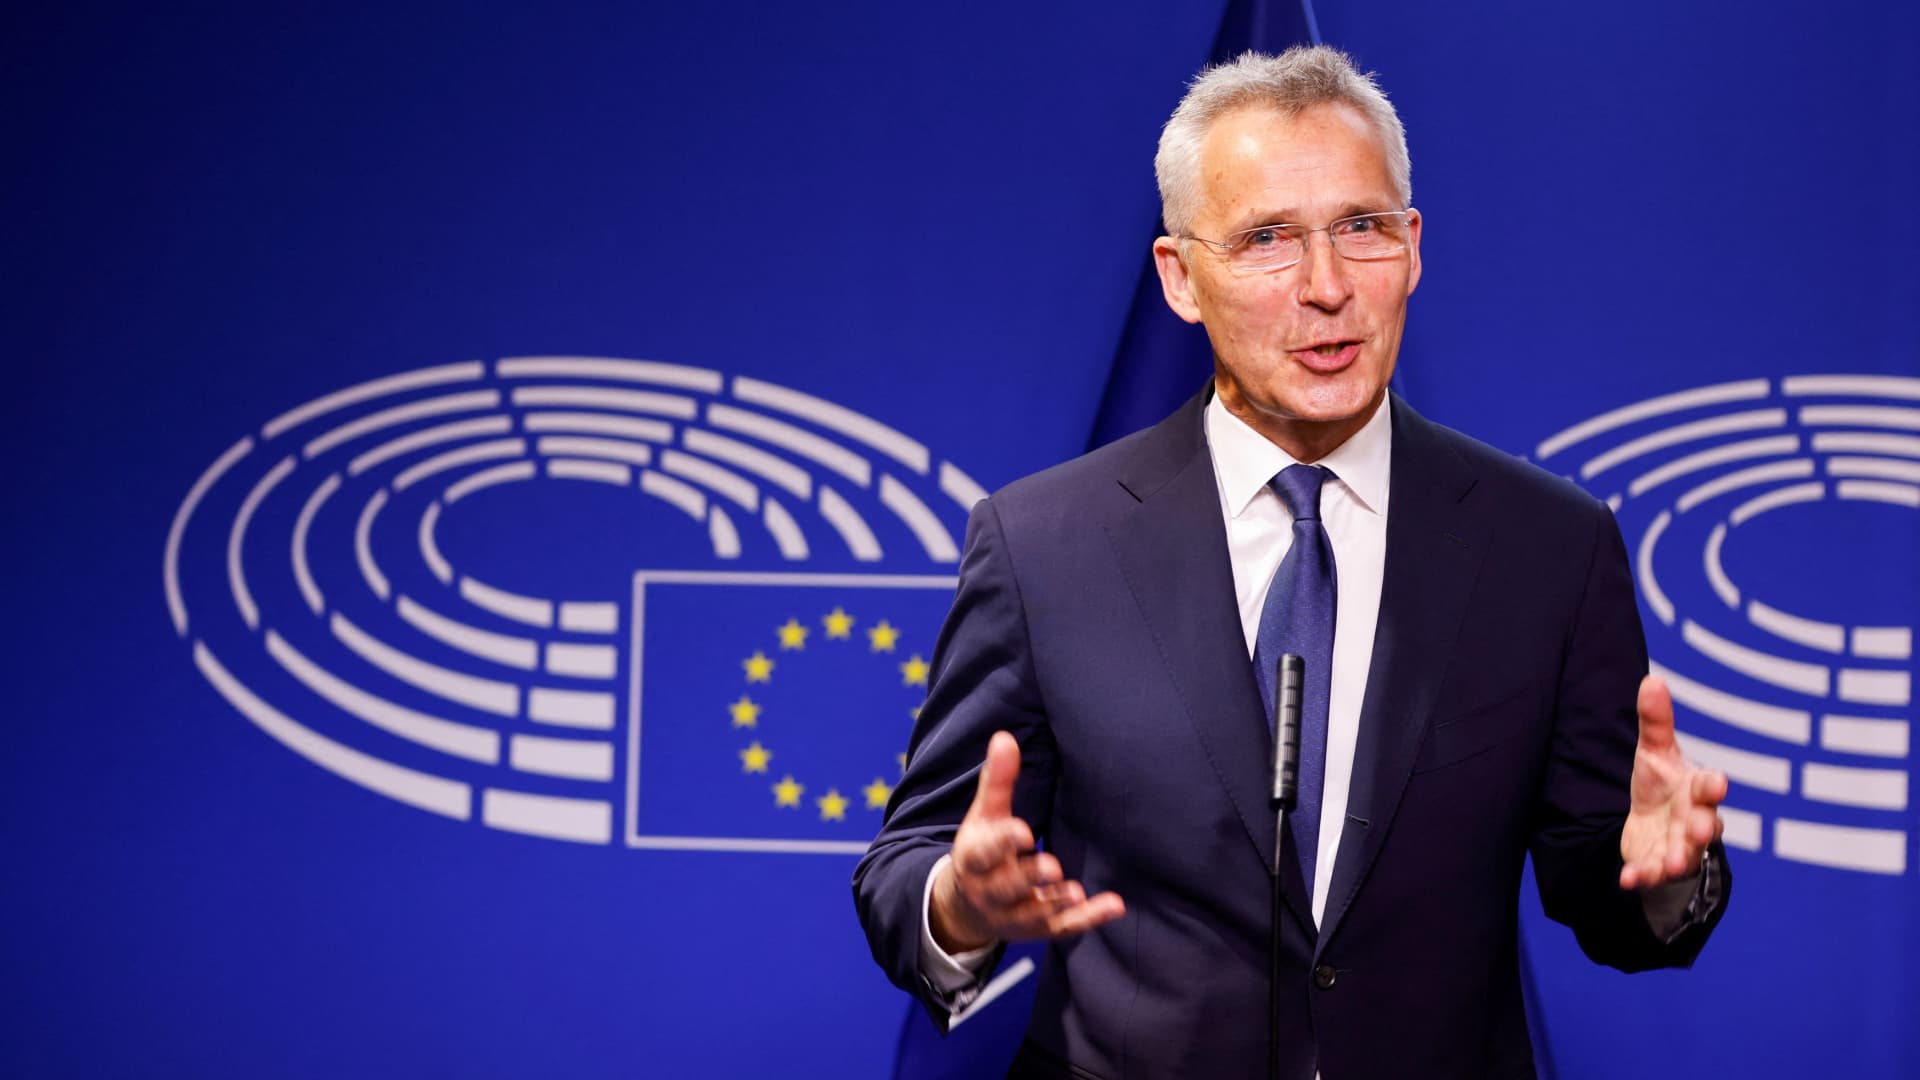 NATO Secretary-General Jens Stoltenberg speaks during a news conference along with the European Parliament President Roberta Metsola (not pictured) at the European Parliament in Brussels, Belgium, April 28, 2022. 